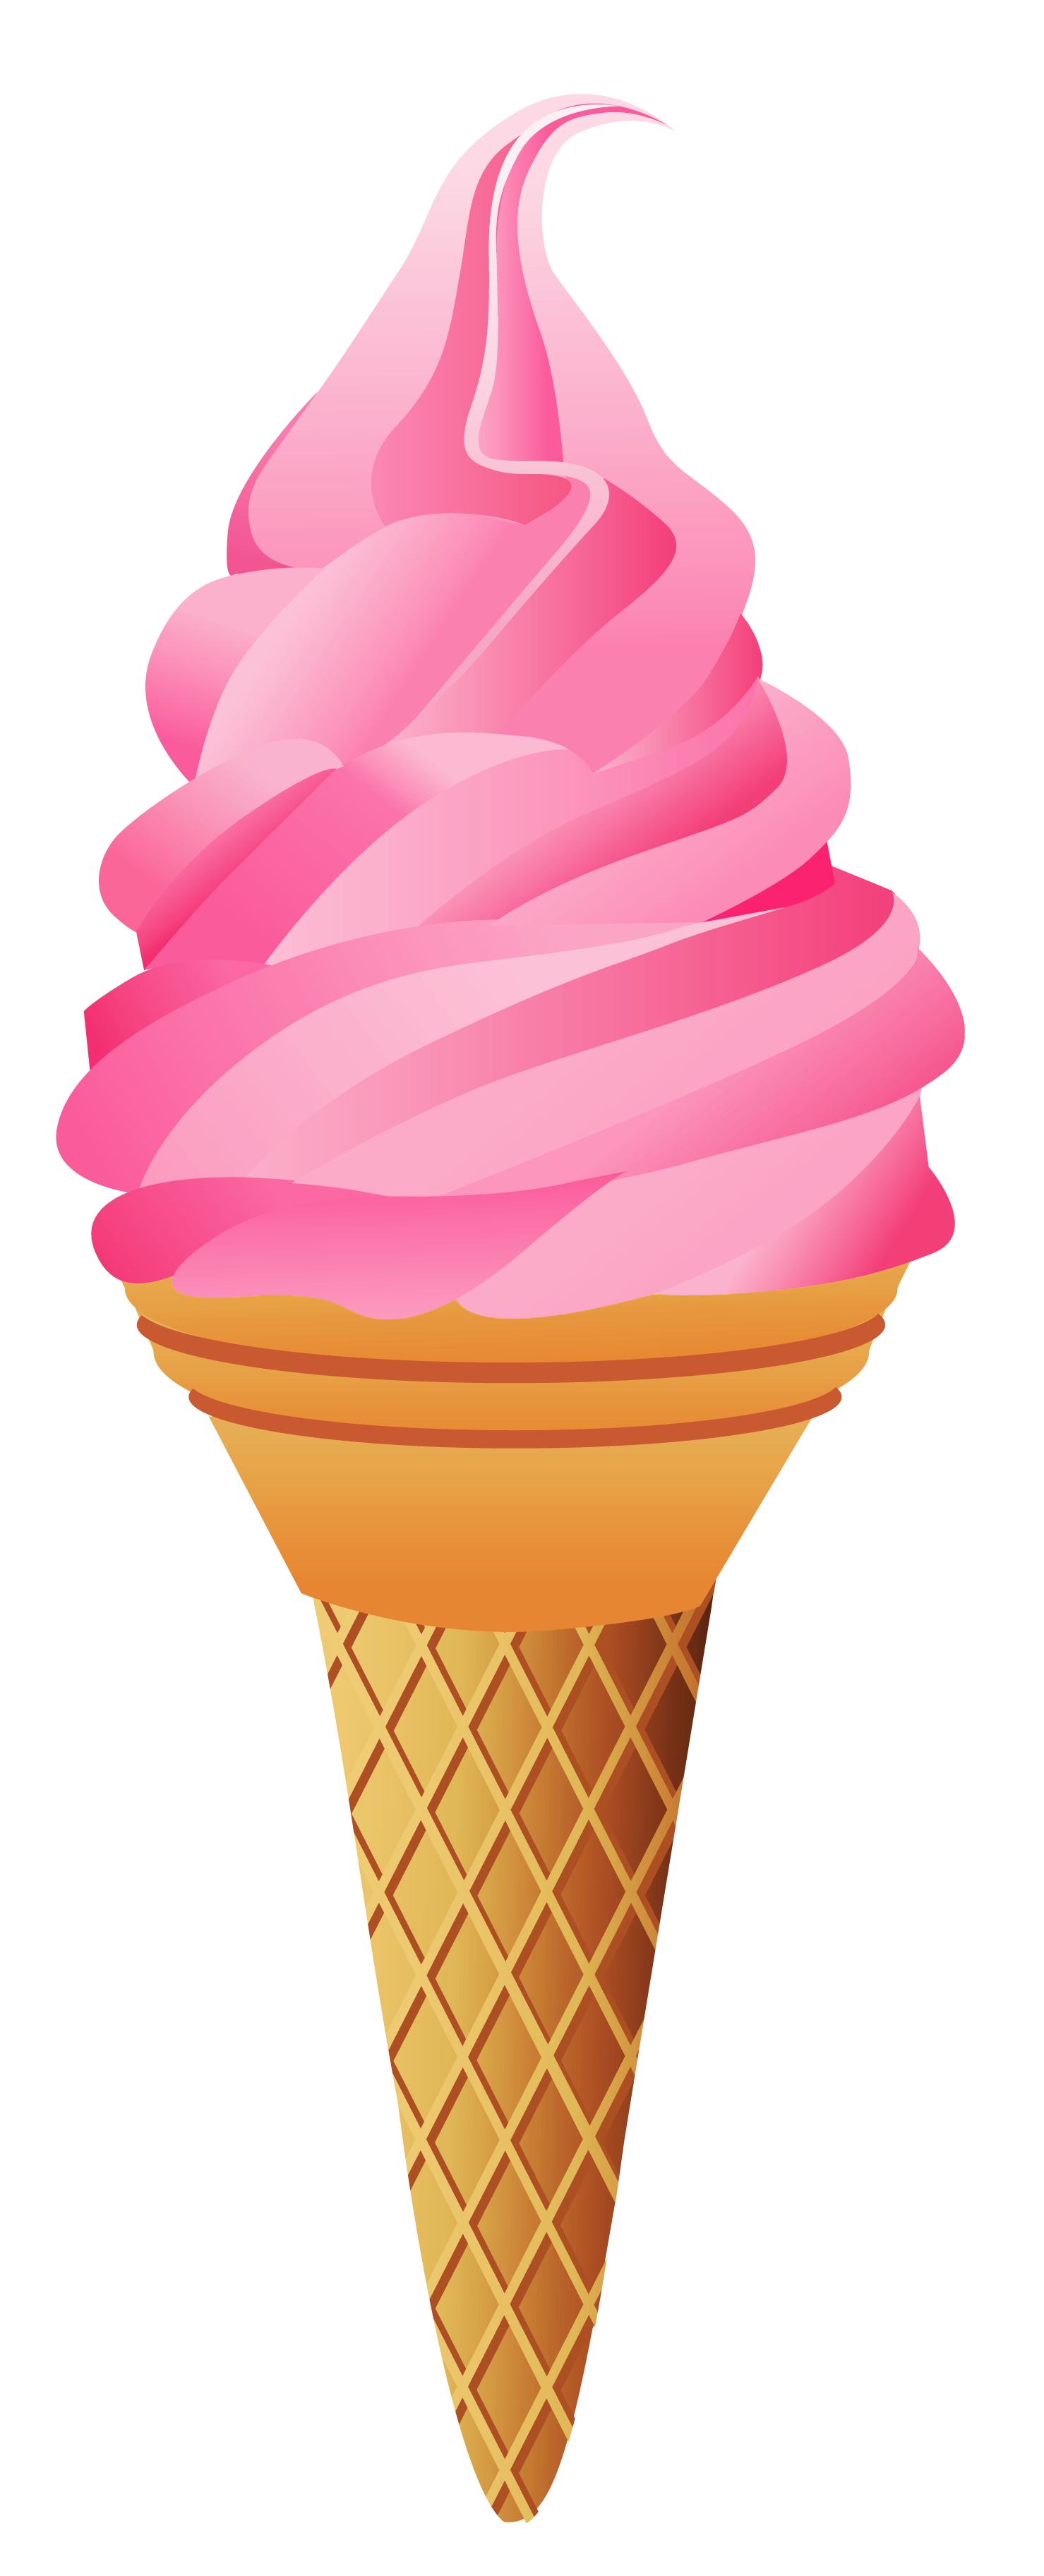  collection of ice. Sundae clipart soft serve